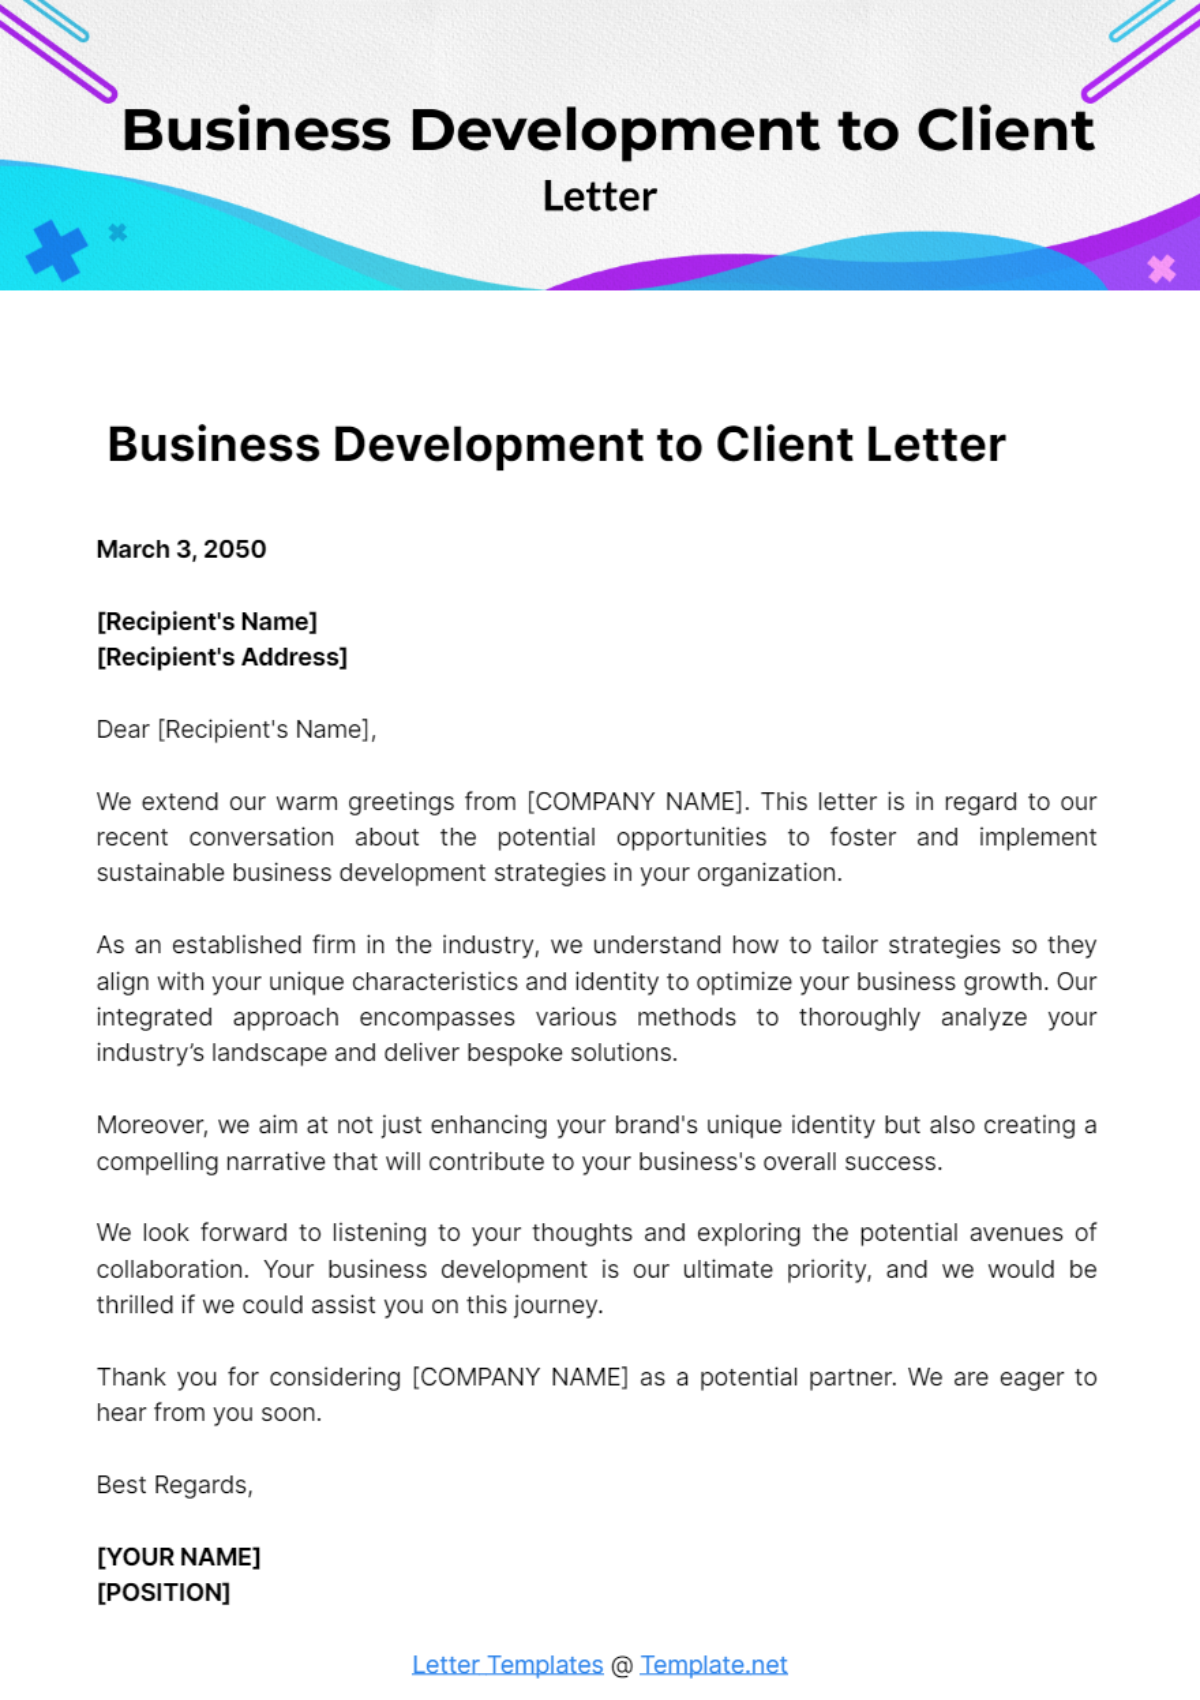 Free Business Development Letter to Client Template